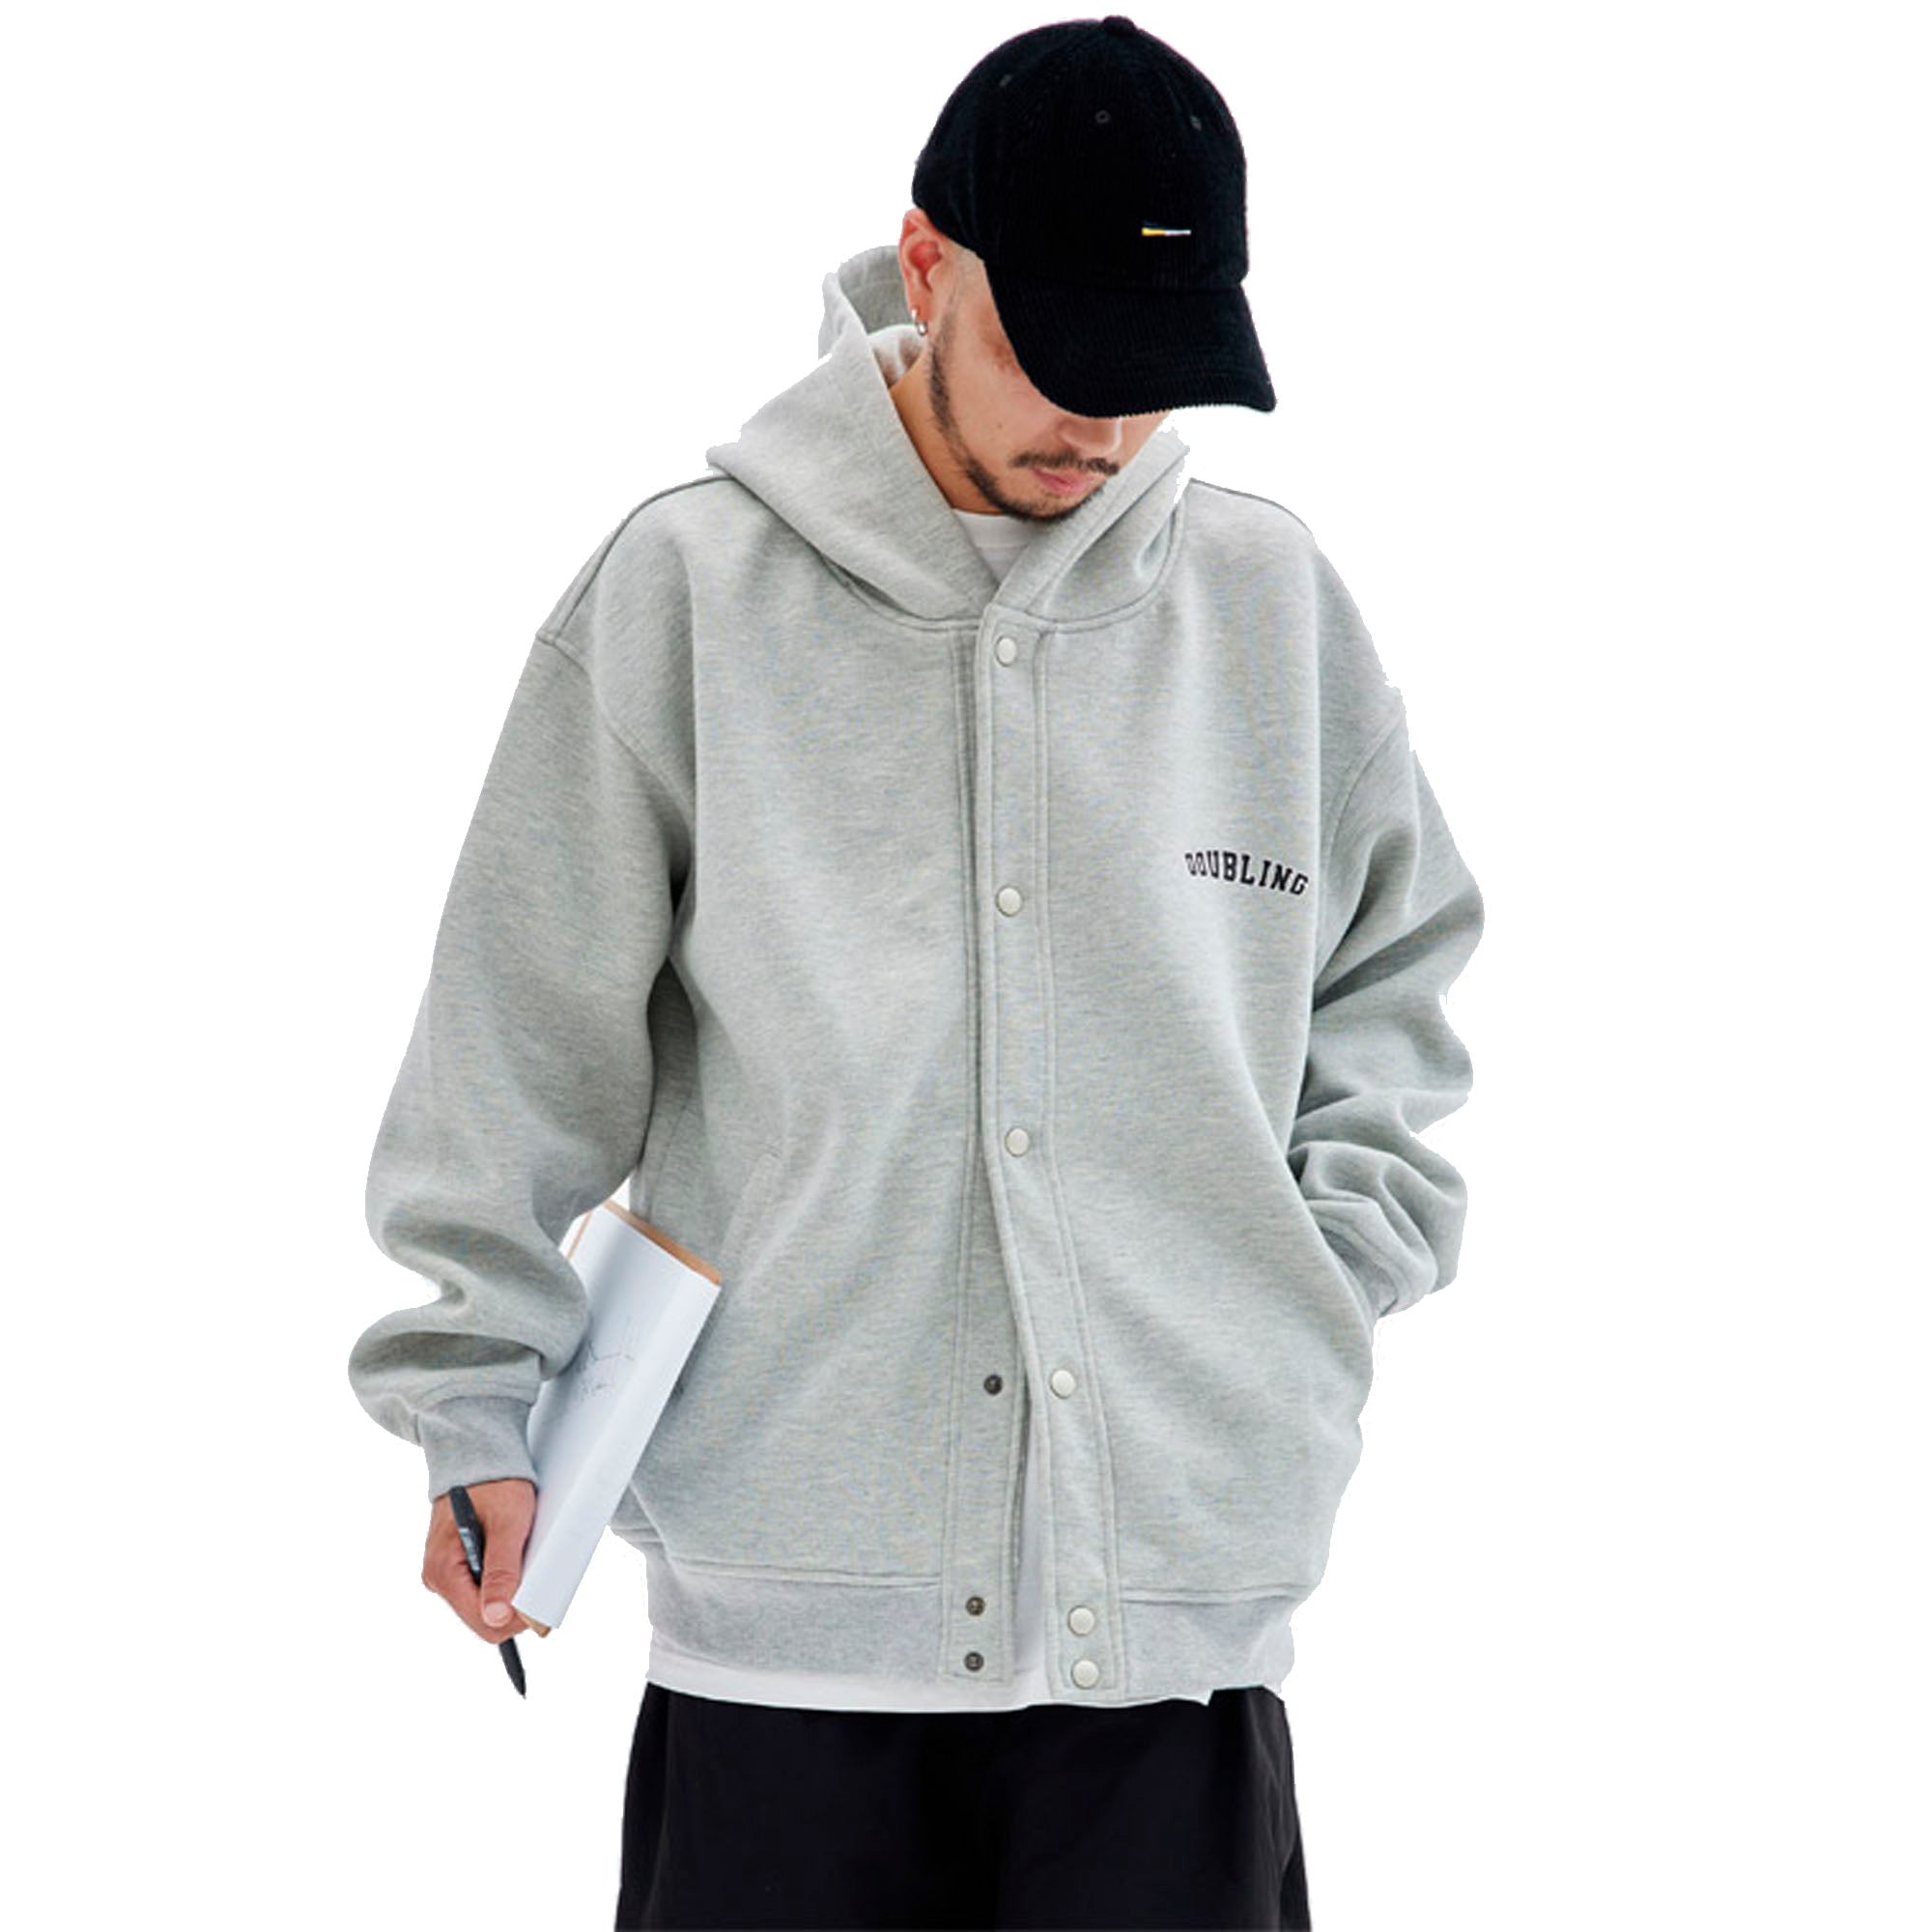 Front opening button hoodie